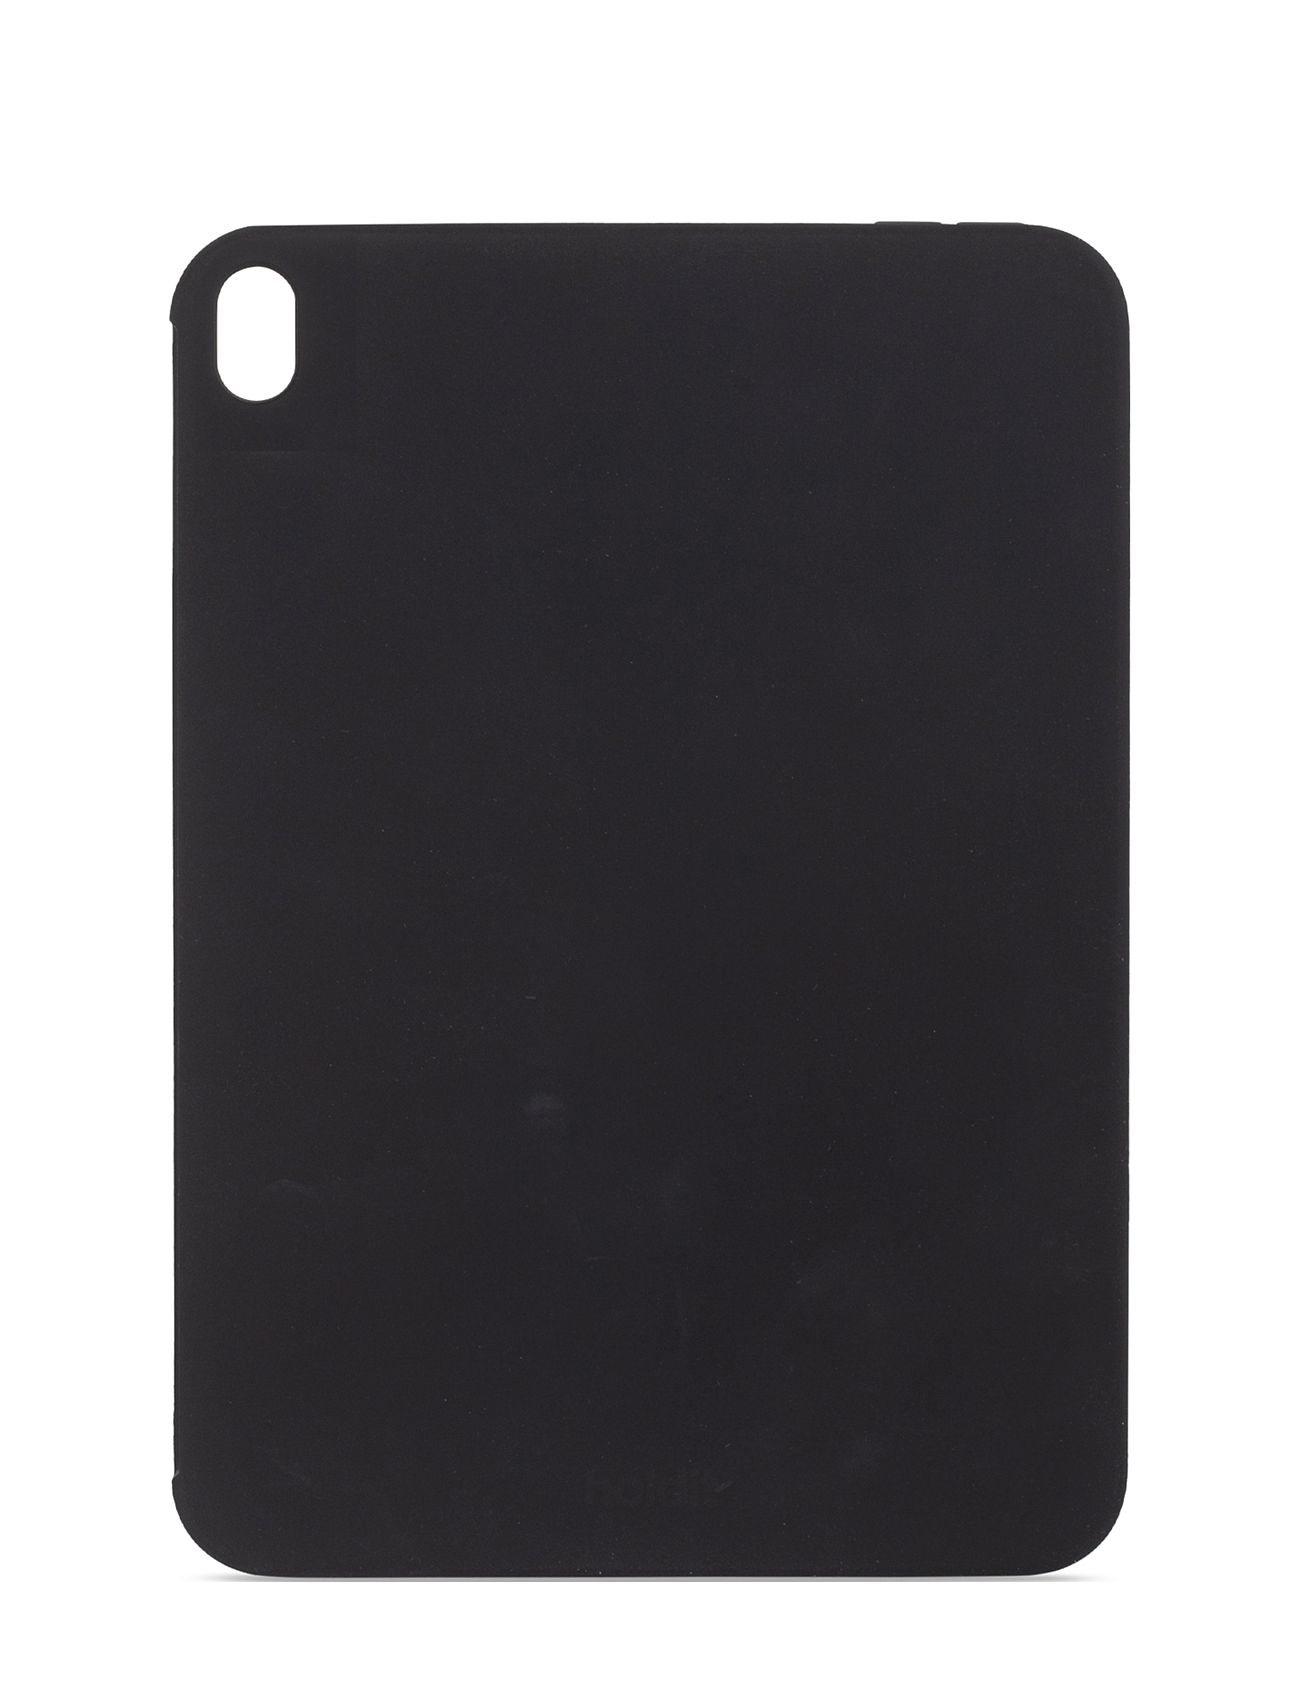 Silic Case Ipad Air 10.9 Mobilaccessory-covers Tablet Cases Black Holdit